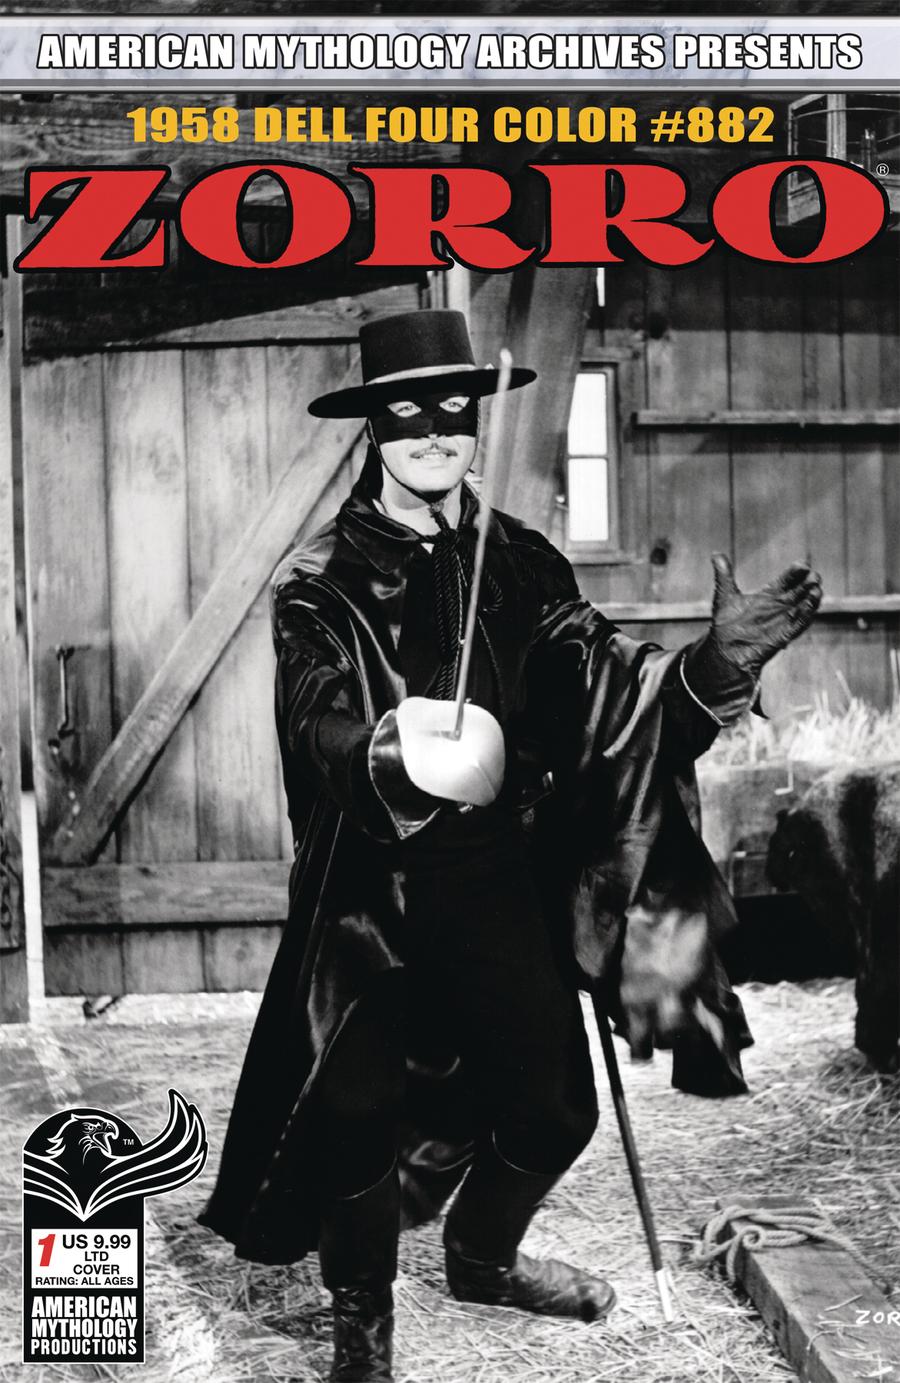 American Mythology Archives Zorro 1958 Dell Four Color #882 Cover B Limited Edition Black & White TV Photo Variant Cover